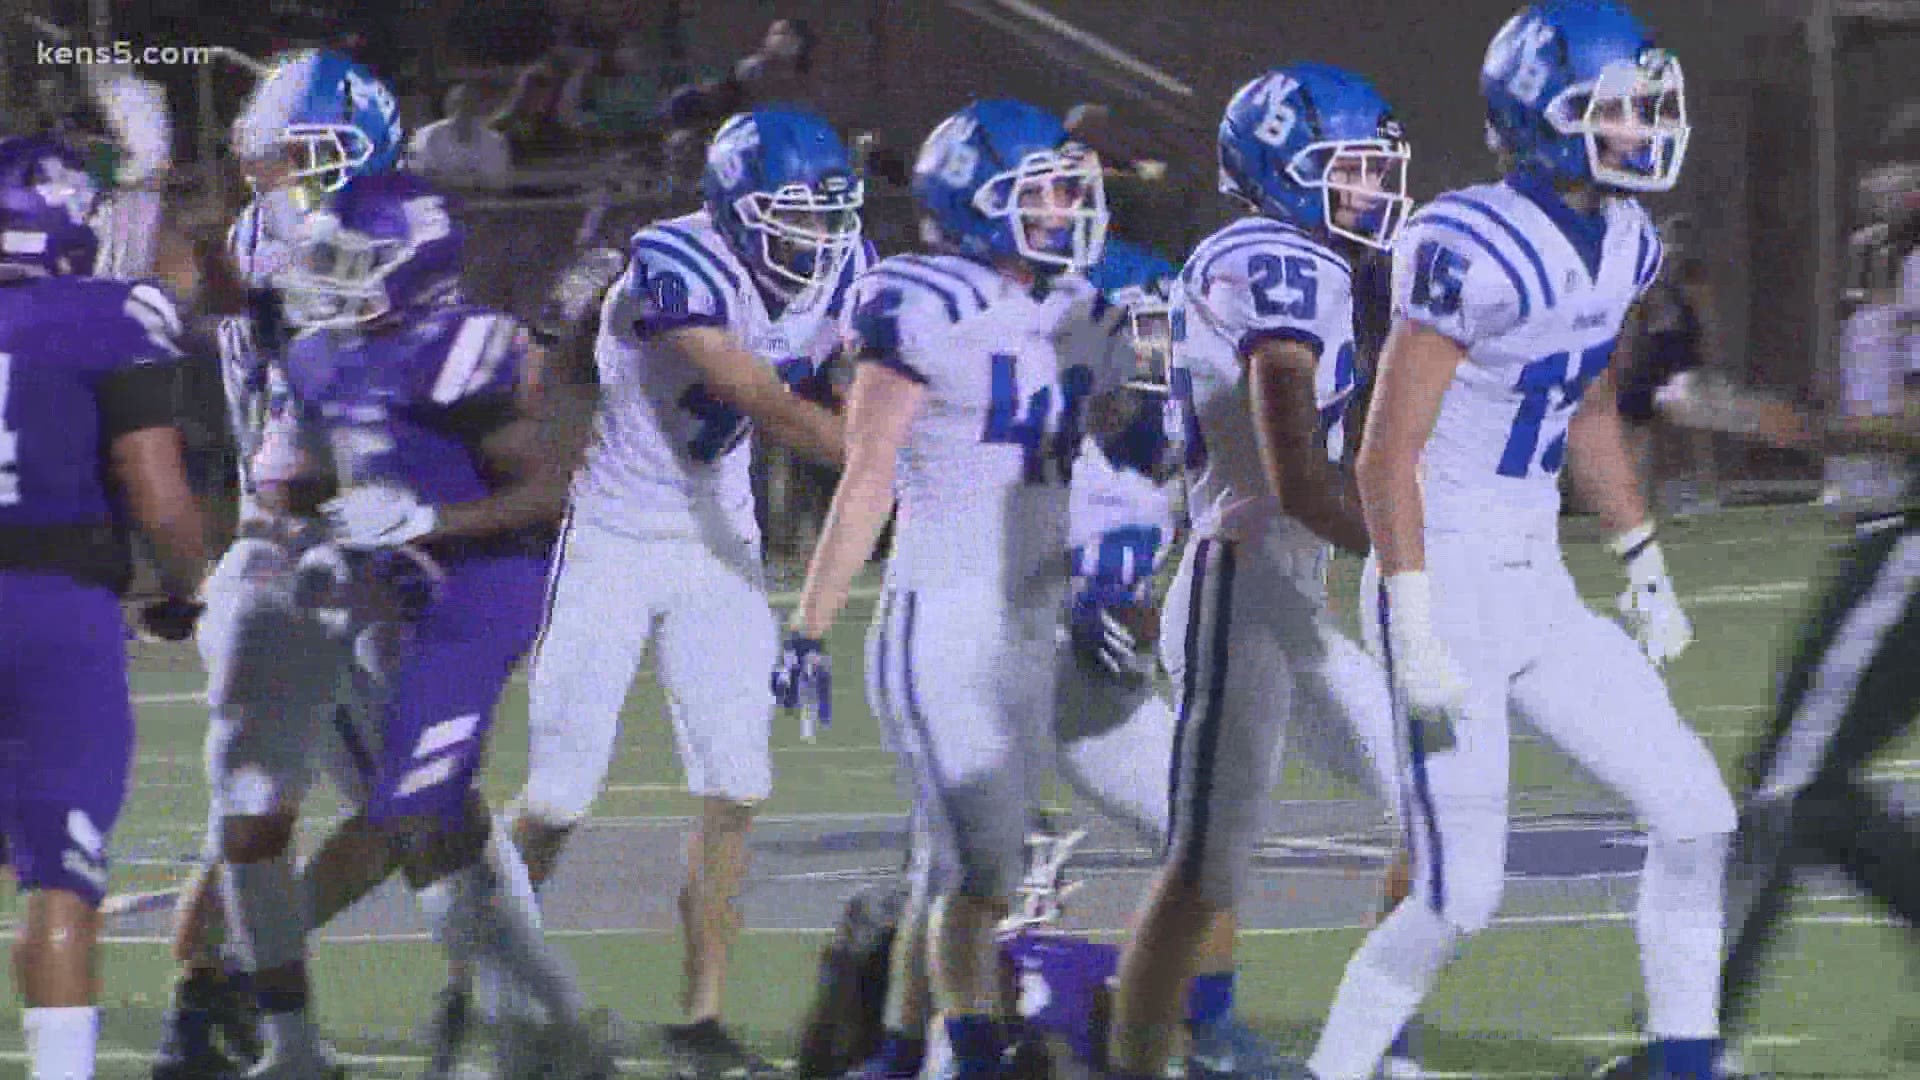 Austin Westlake limited Clemens to a lone TD and New Braunfels squeaked by San Marcos.